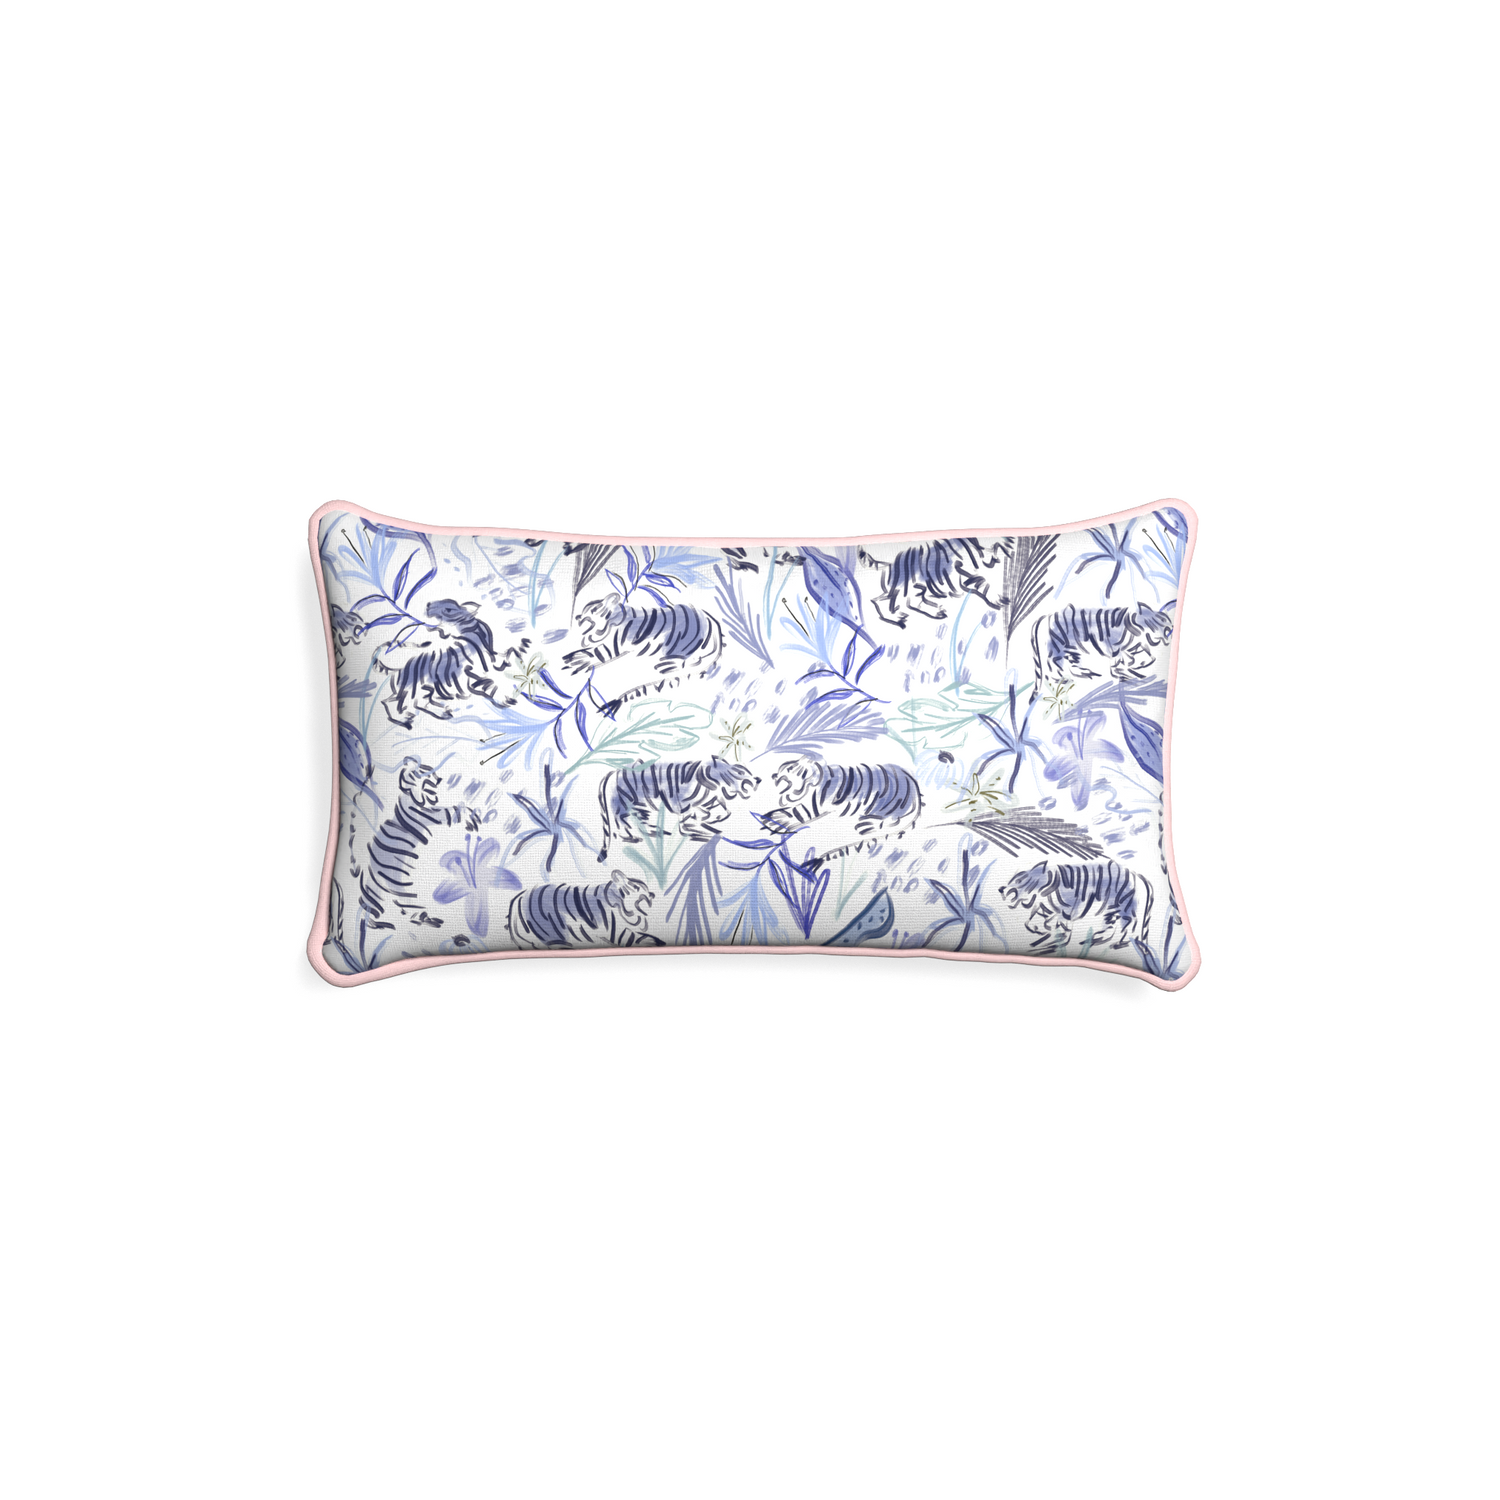 Petite-lumbar frida blue custom blue with intricate tiger designpillow with petal piping on white background